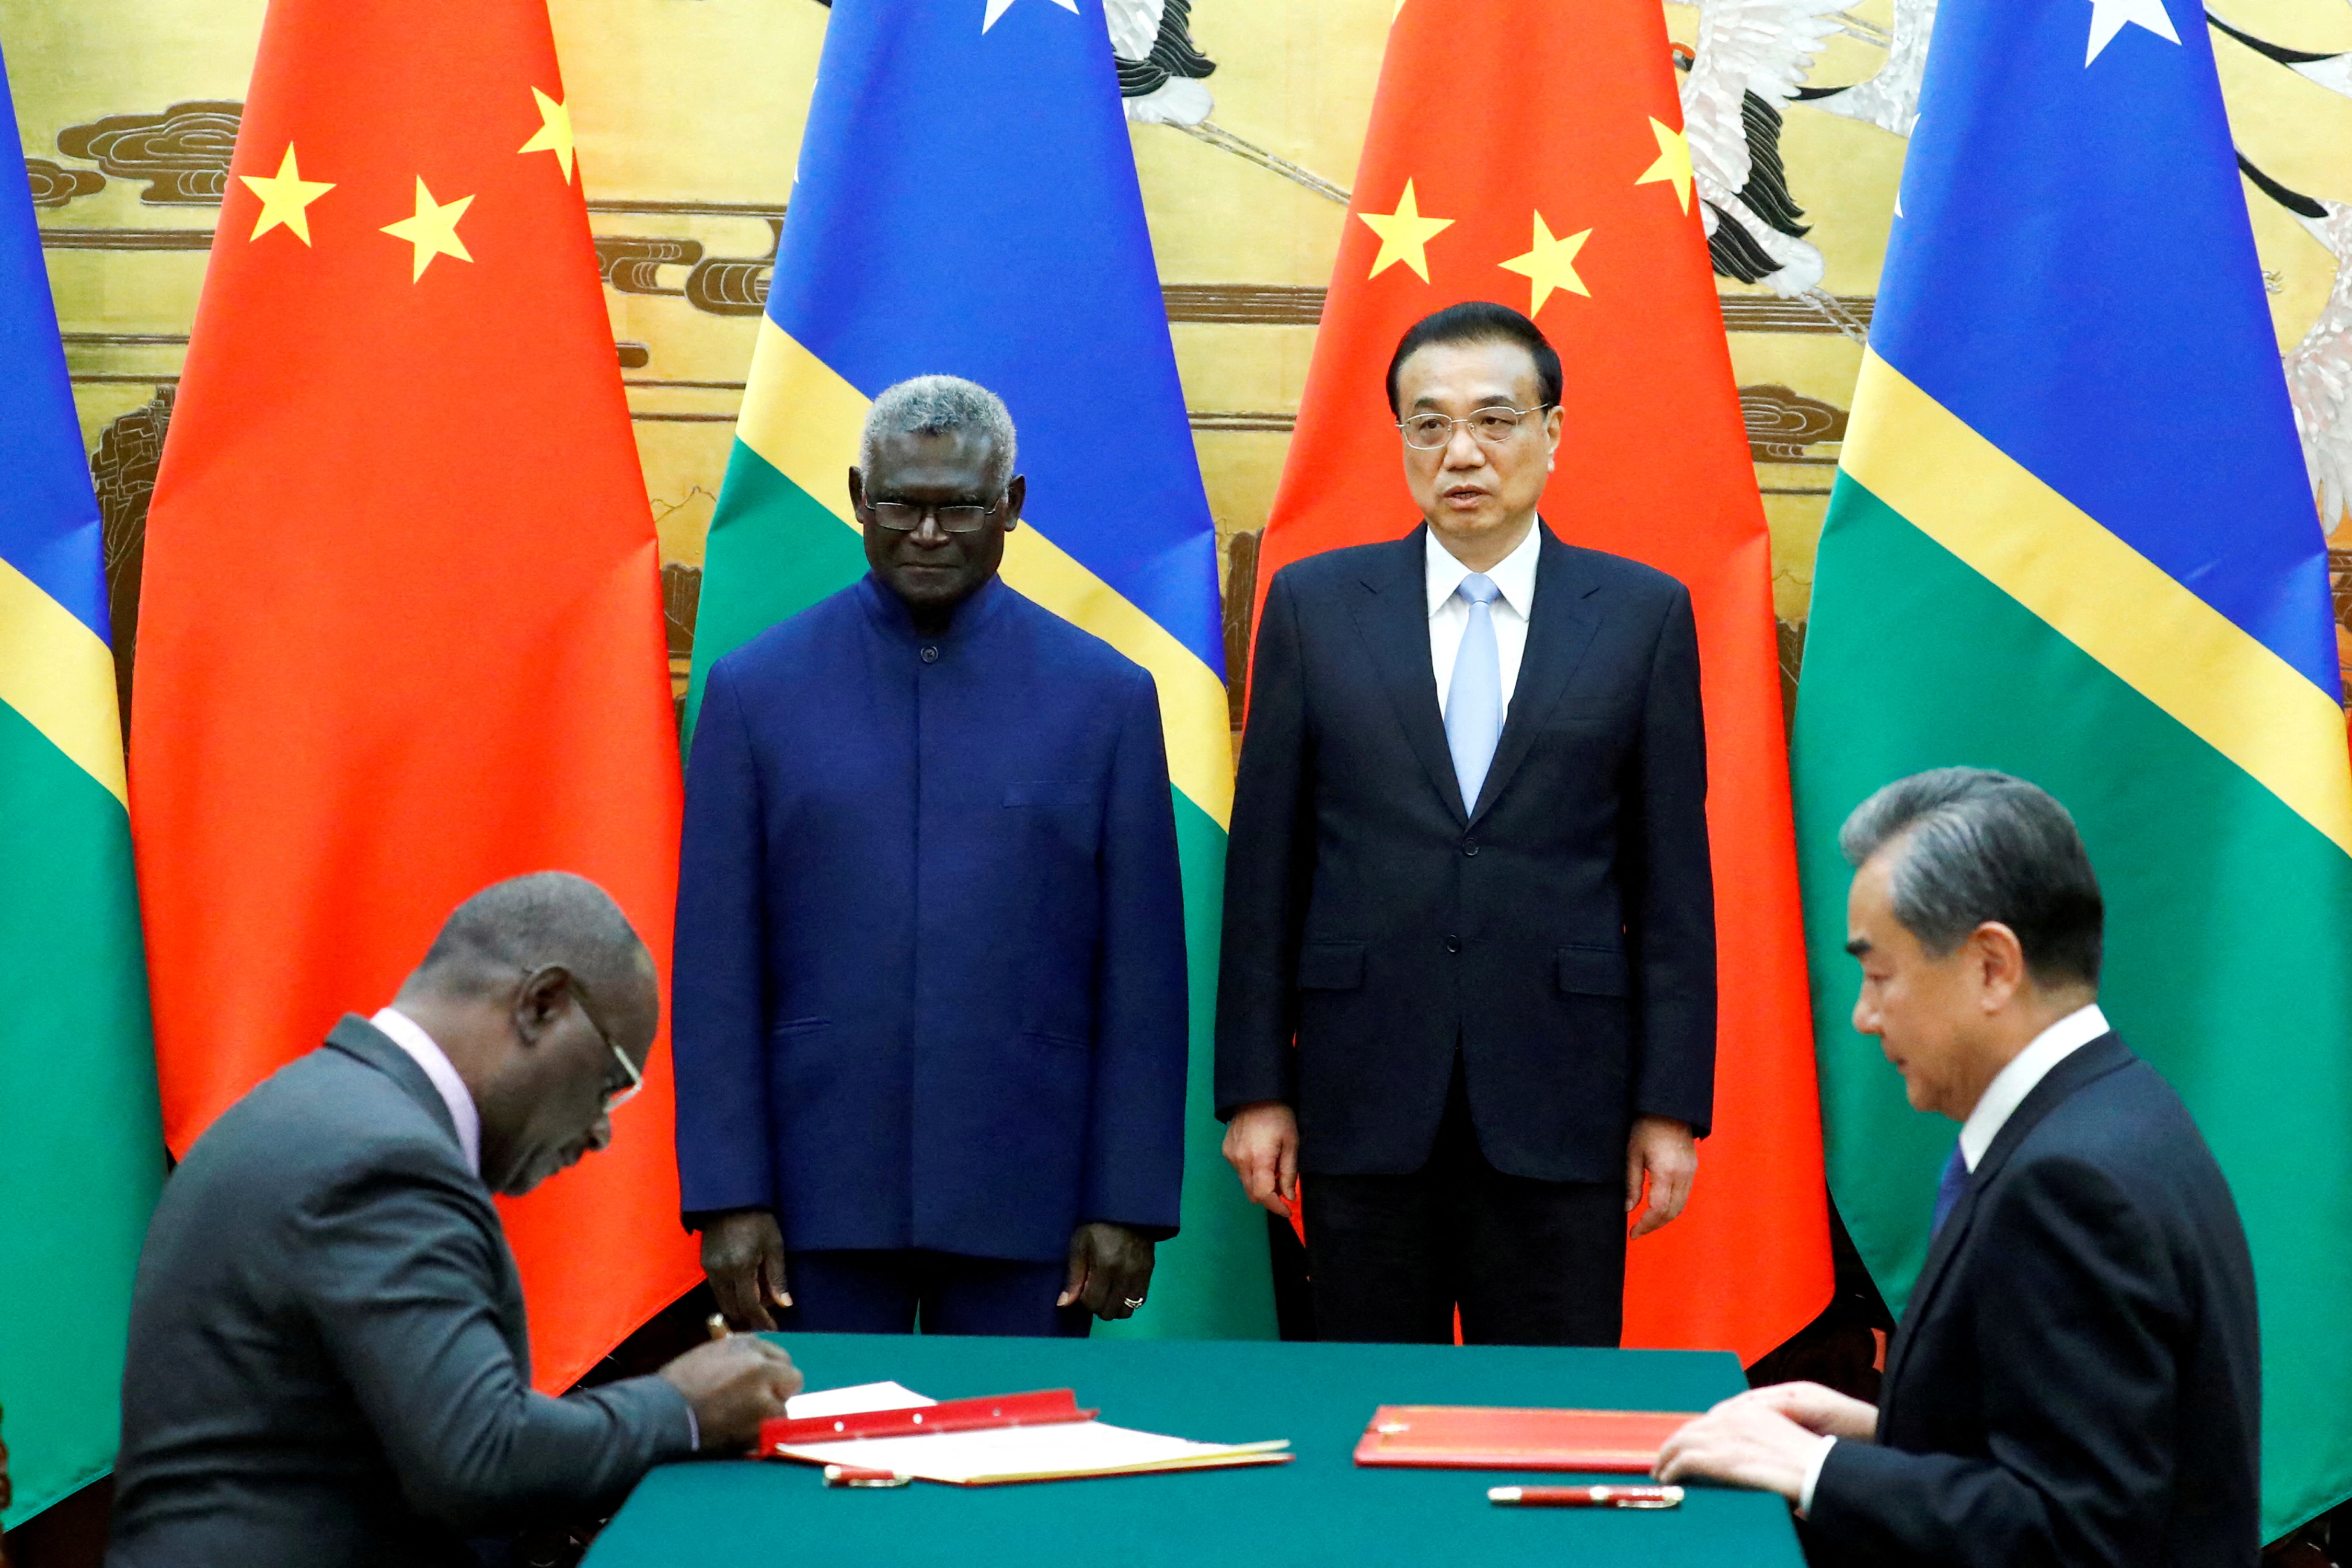 Solomon Islands Prime Minister Manasseh Sogavare, Solomon Islands Foreign Minister Jeremiah Manele, Chinese Premier Li Keqiang and Chinese State Councillor and Foreign Minister Wang Yi attend a signing ceremony at the Great Hall of the People i